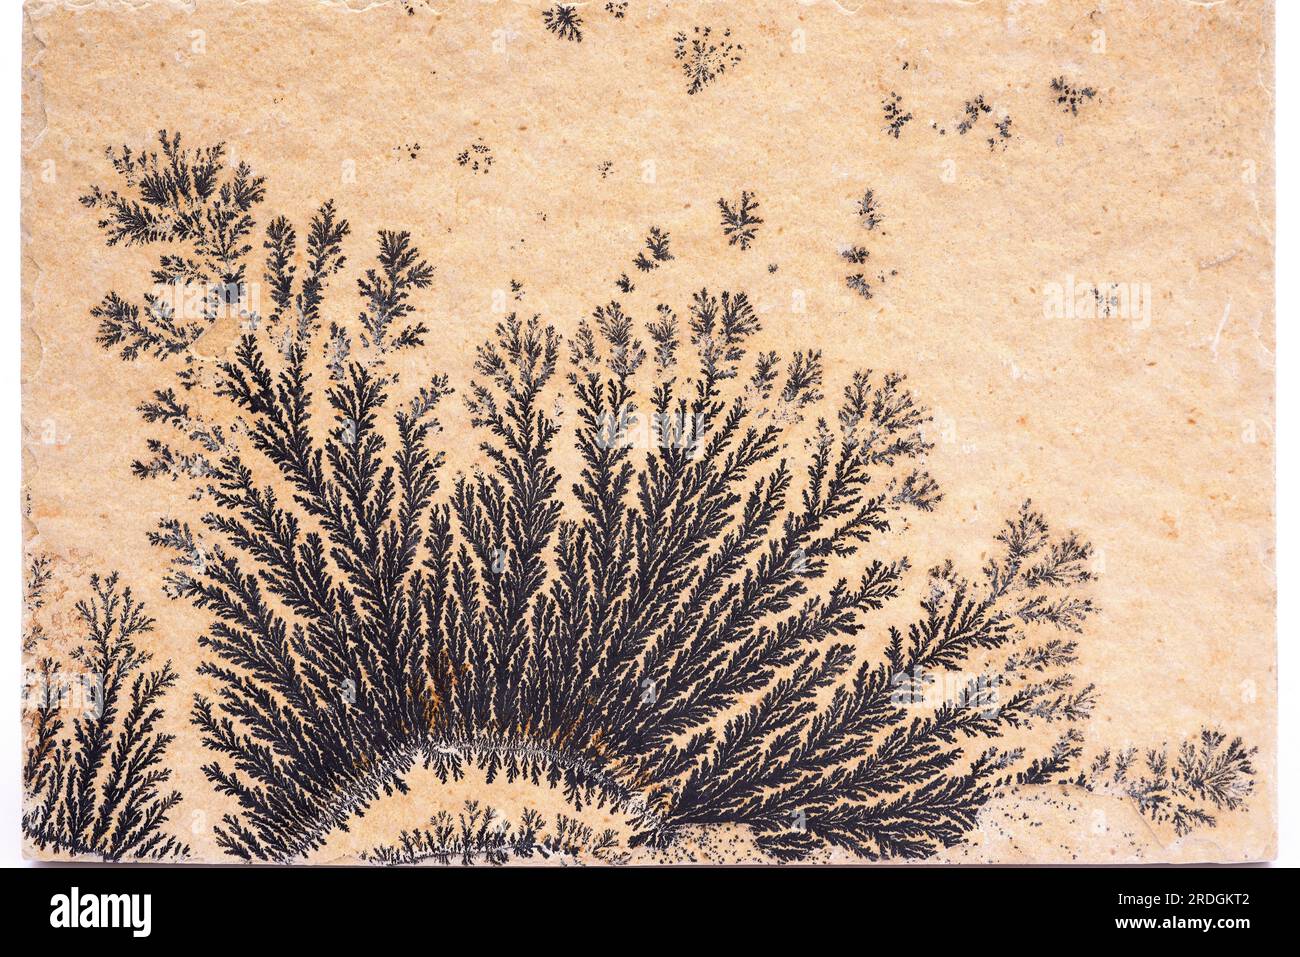 Dendritic crystals of pyrolusite on limestone rock. Pyrolusite is a mineral composed by manganese dioxide. Stock Photo